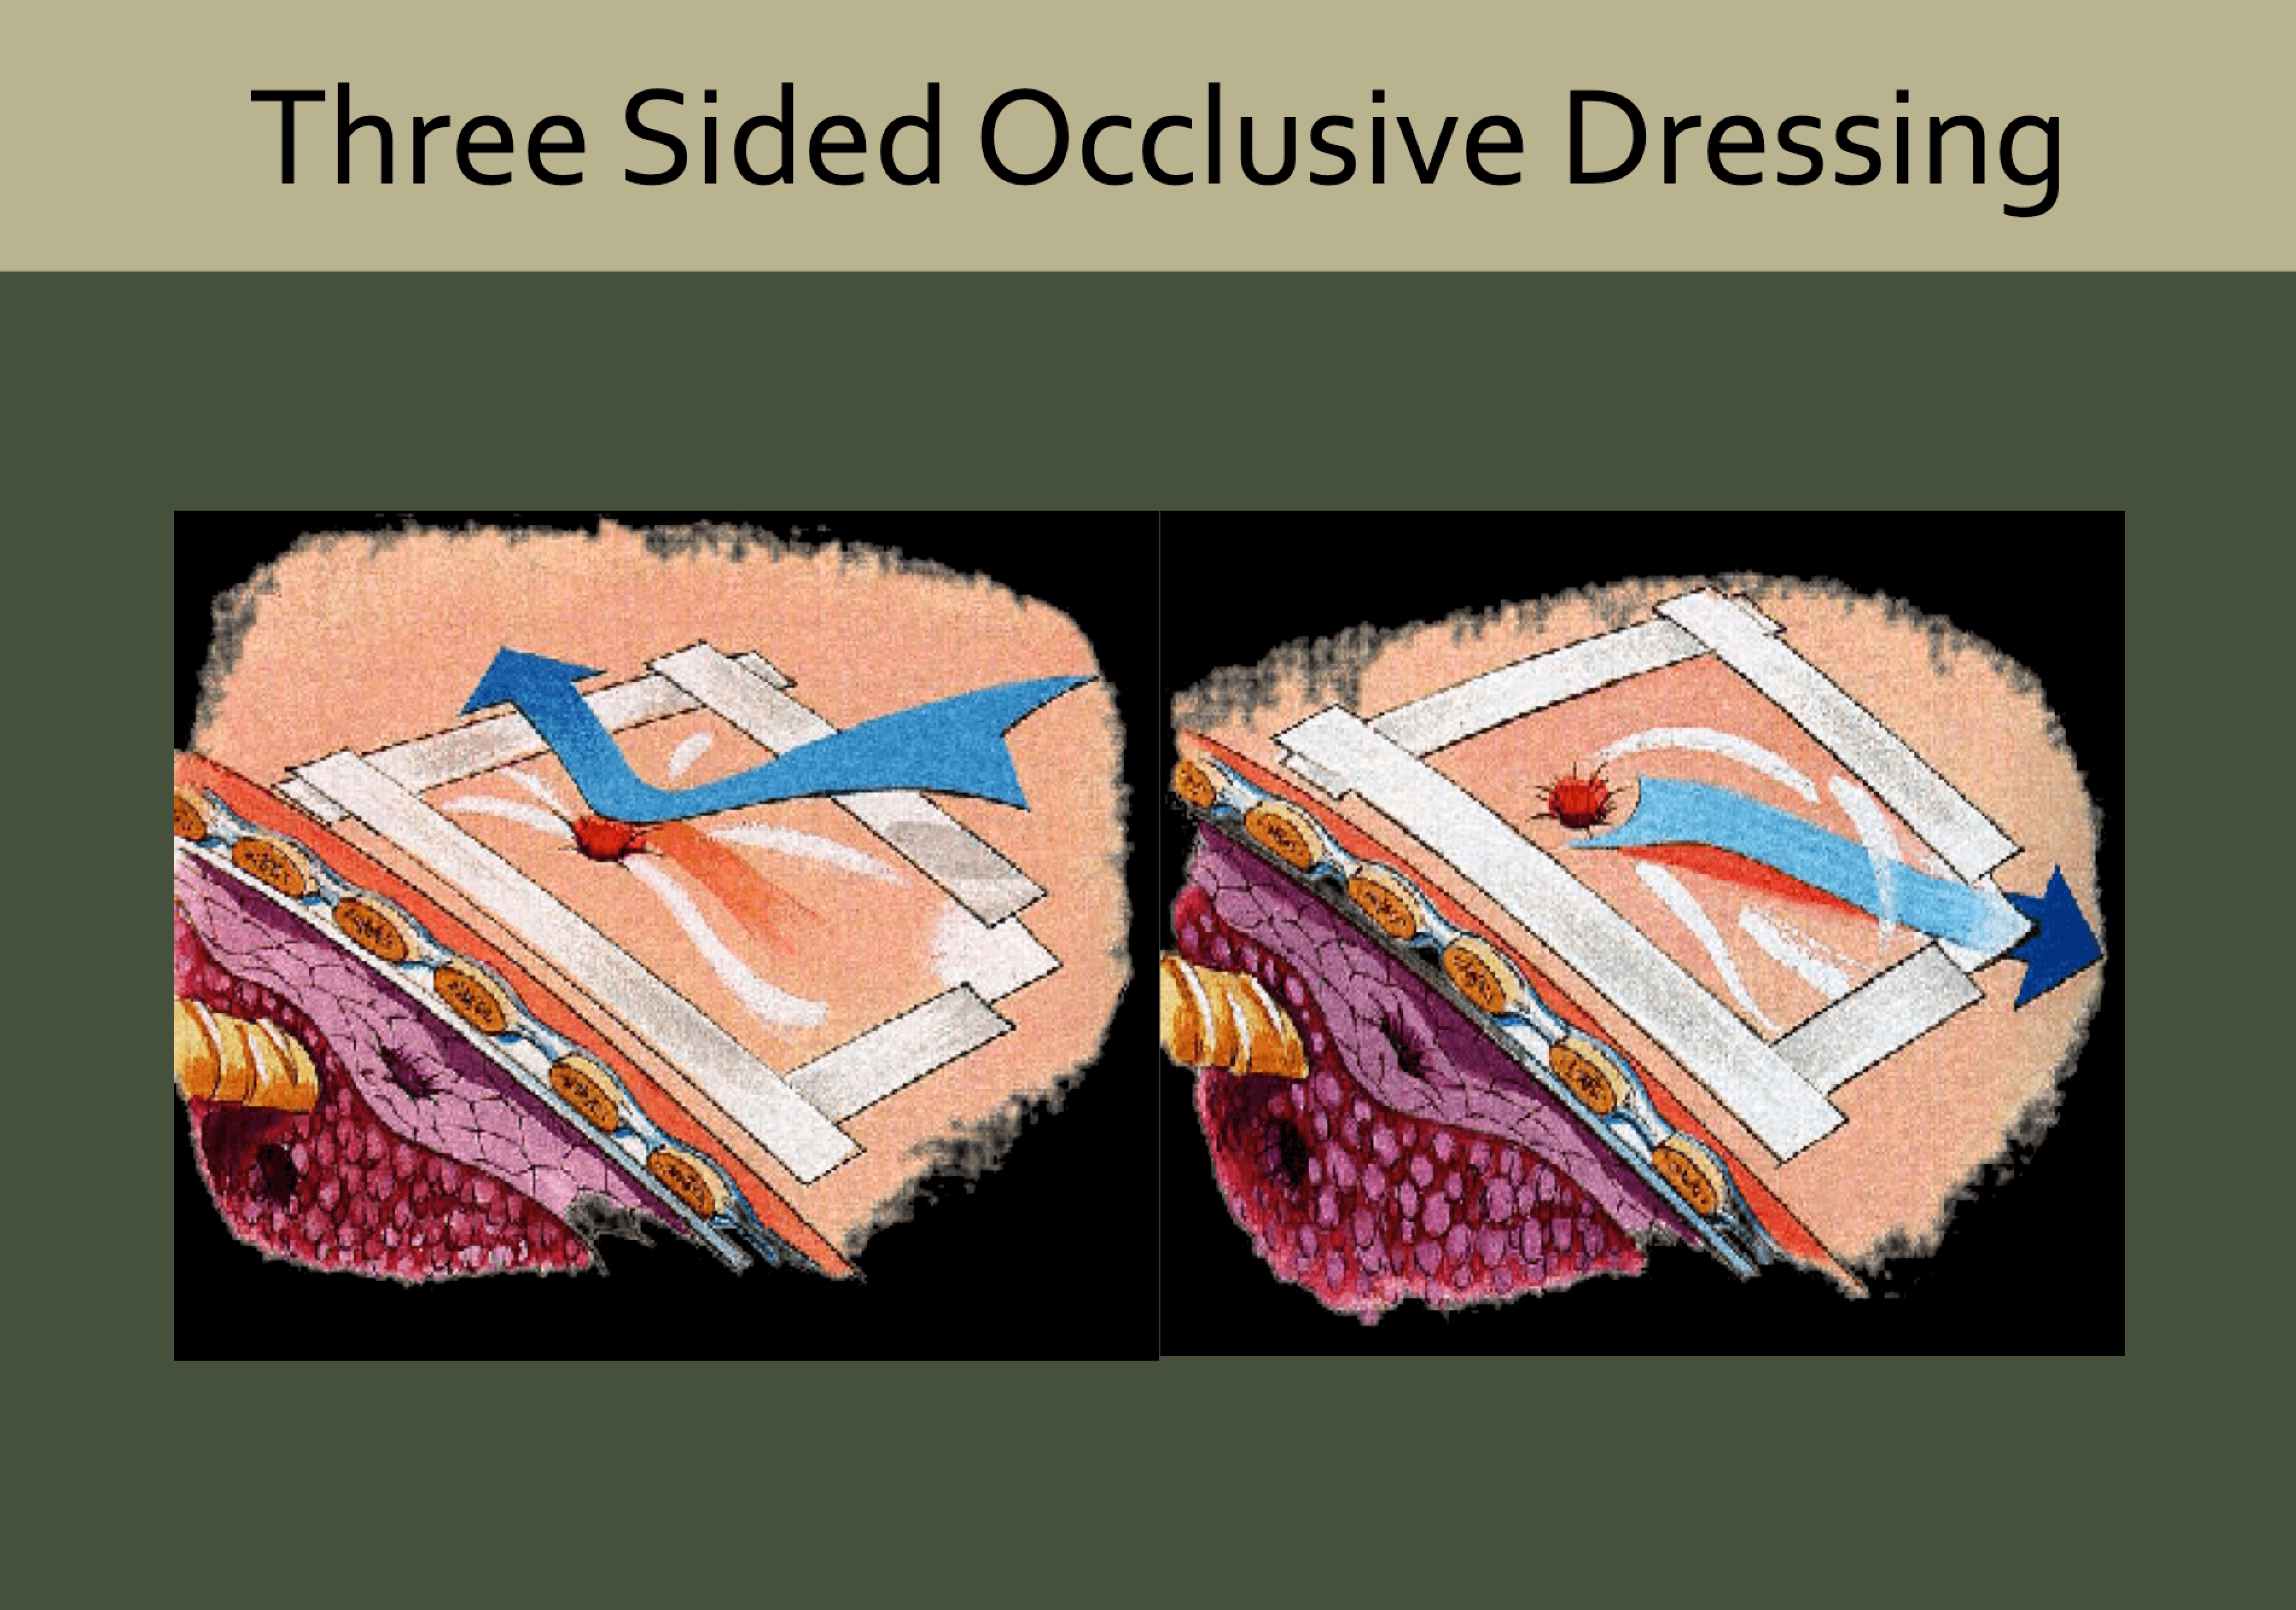 The three sided occlusive dressing is a myth, This diagram shows how it should work but there is no medical evidence to show it does work.